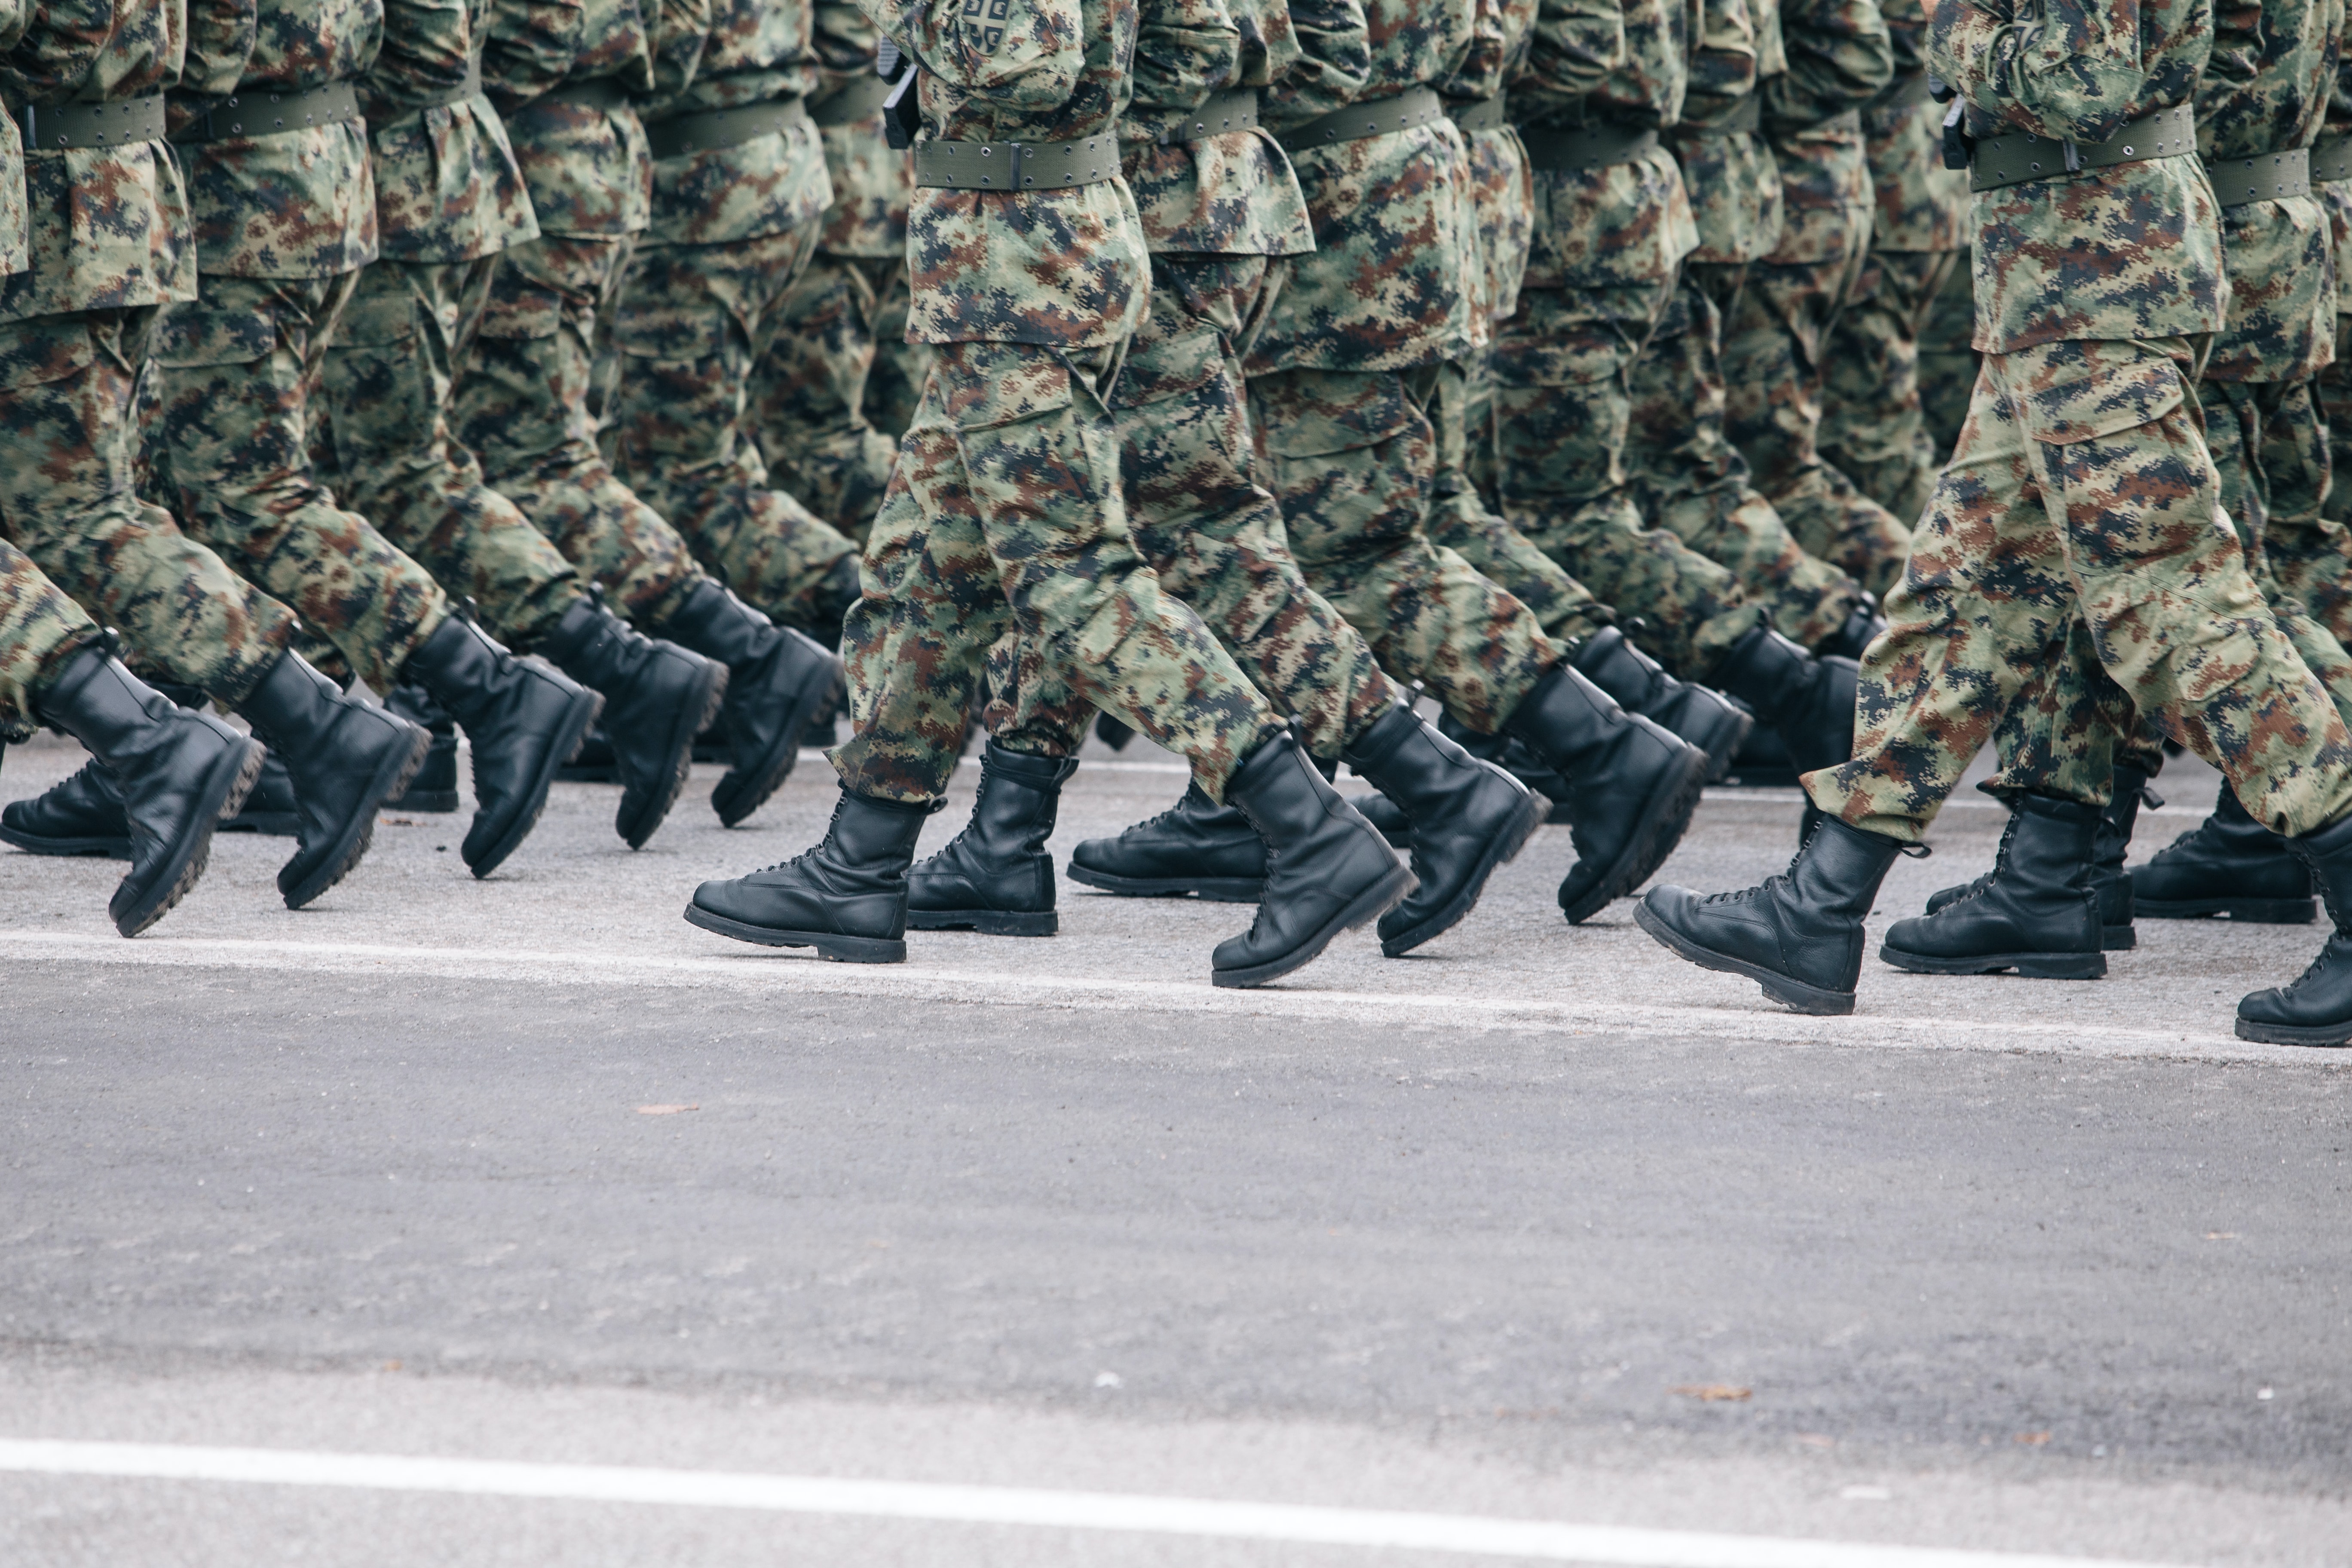 Soldiers dressed in army camouflage march in formation.